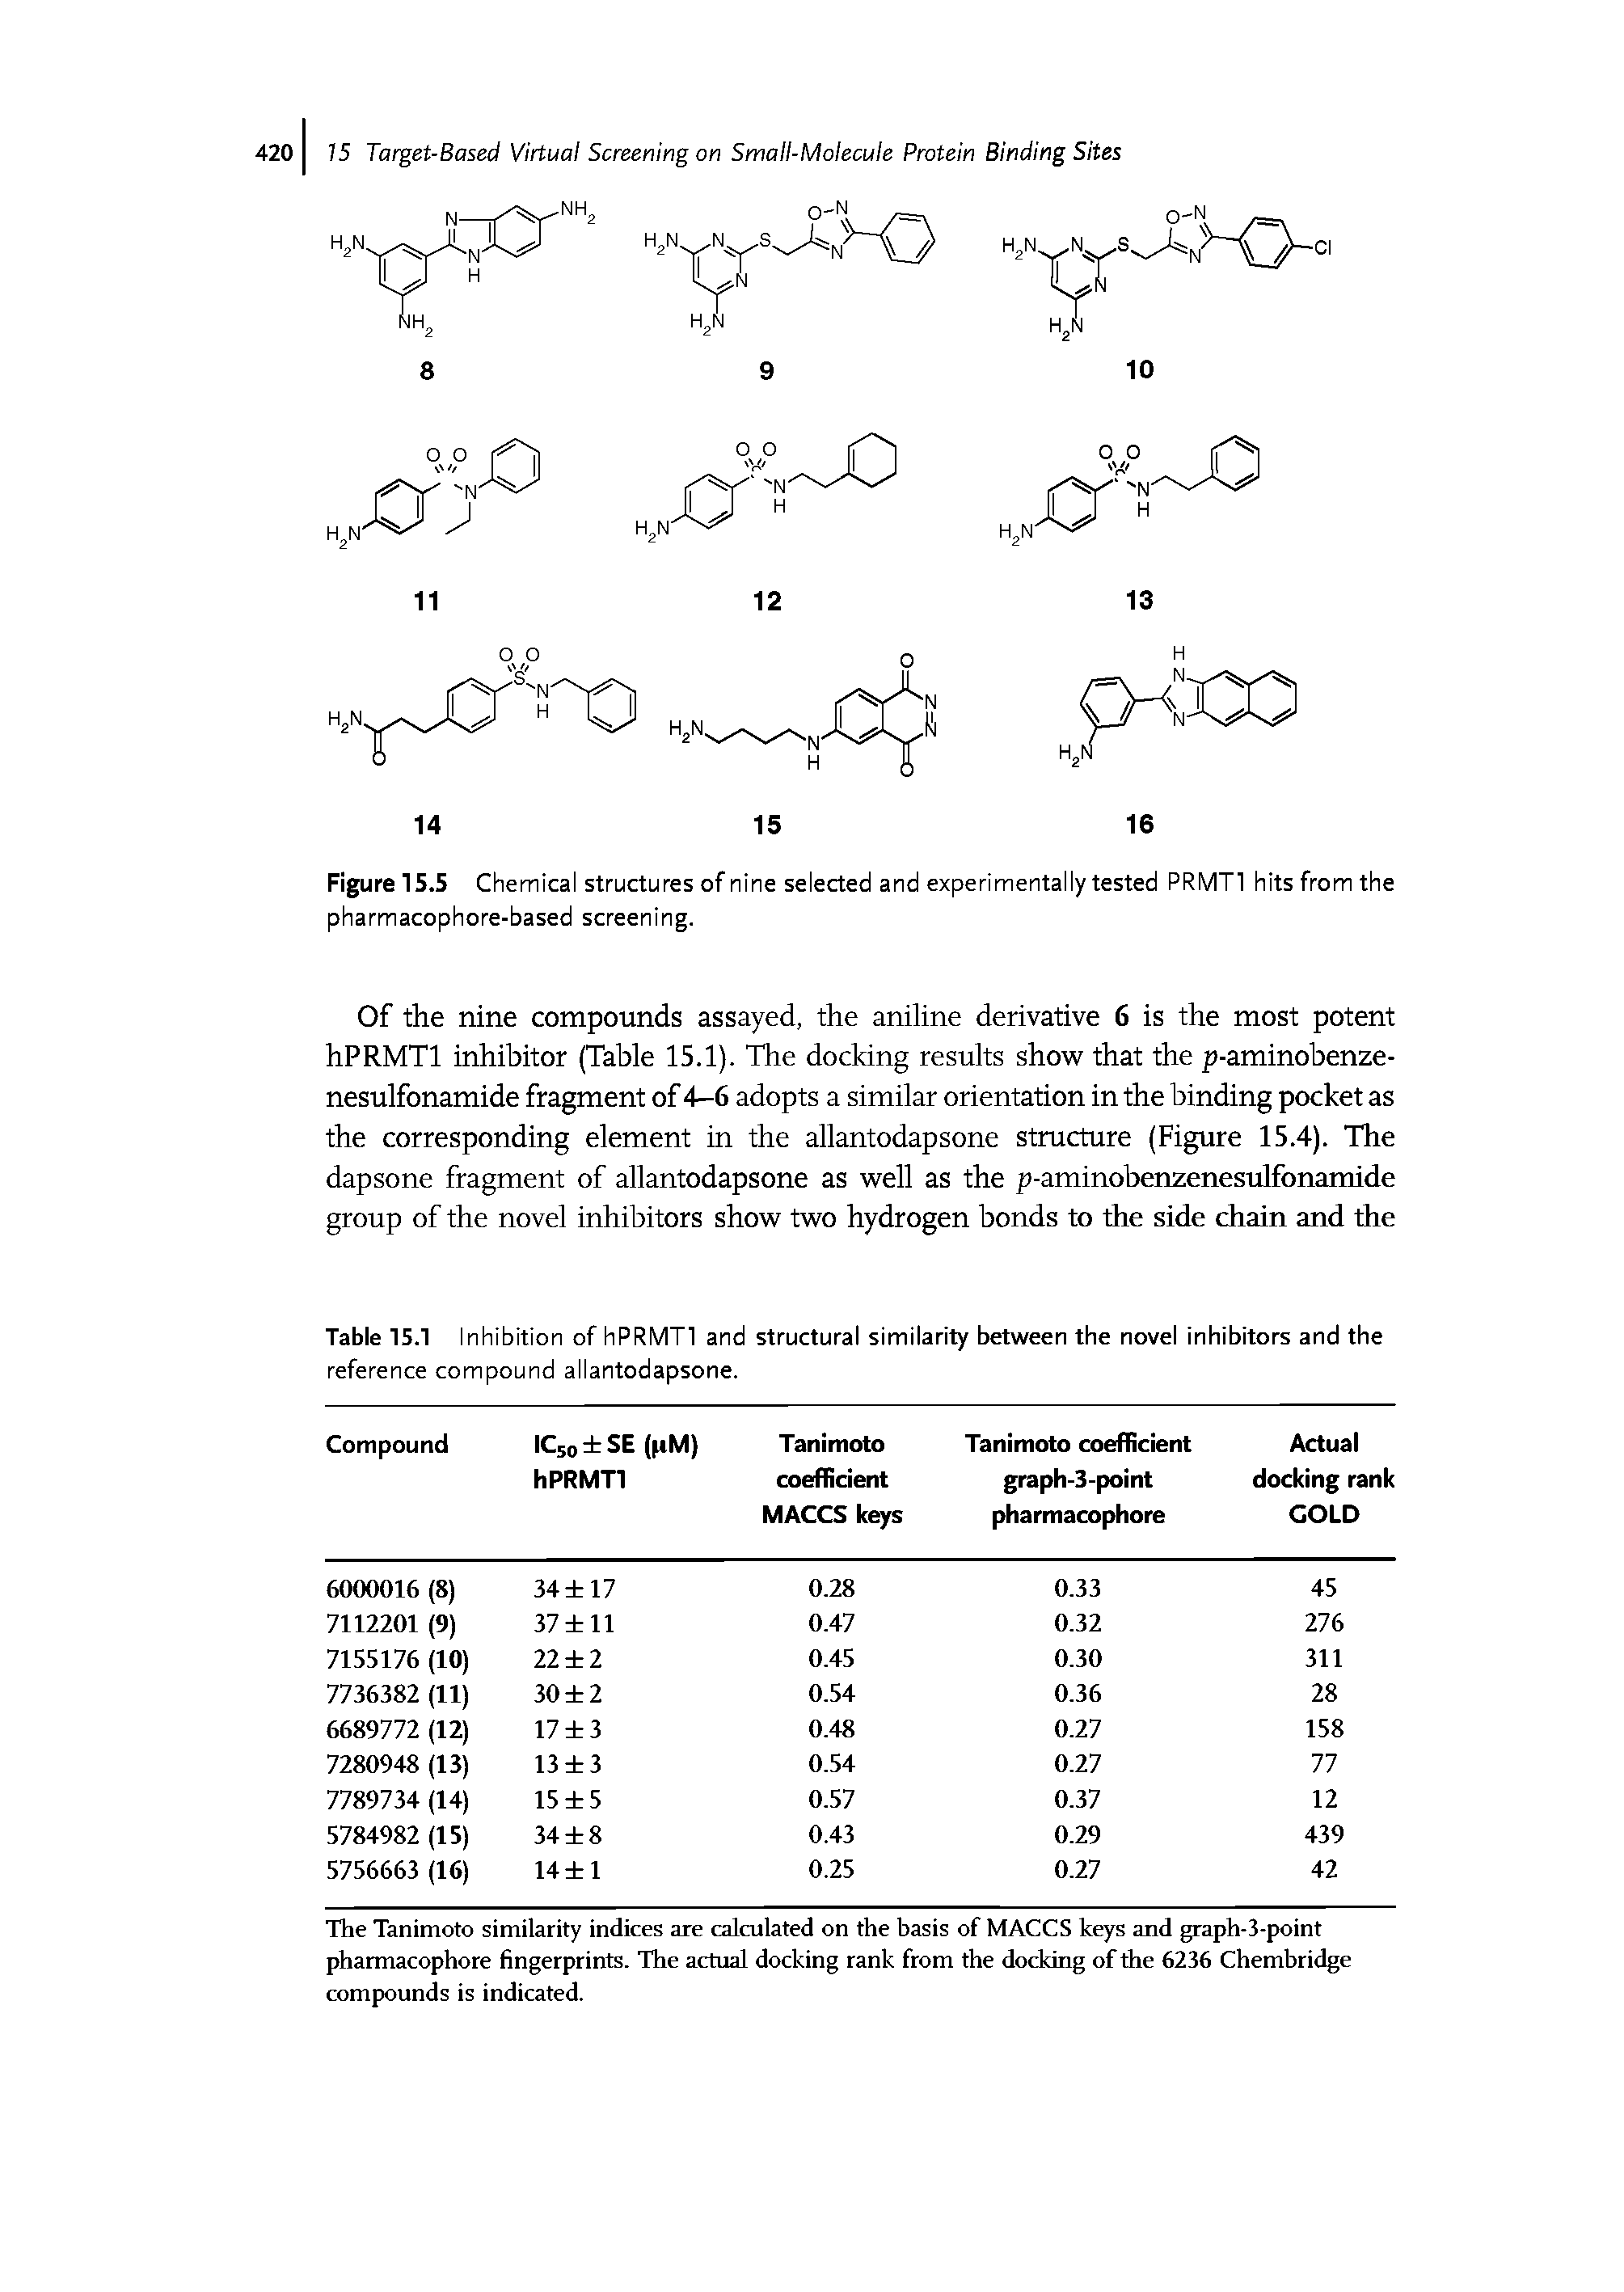 Figure 15.5 Chemical structures of nine selected and experimentally tested PRMTl hits from the pharmacophore-based screening.